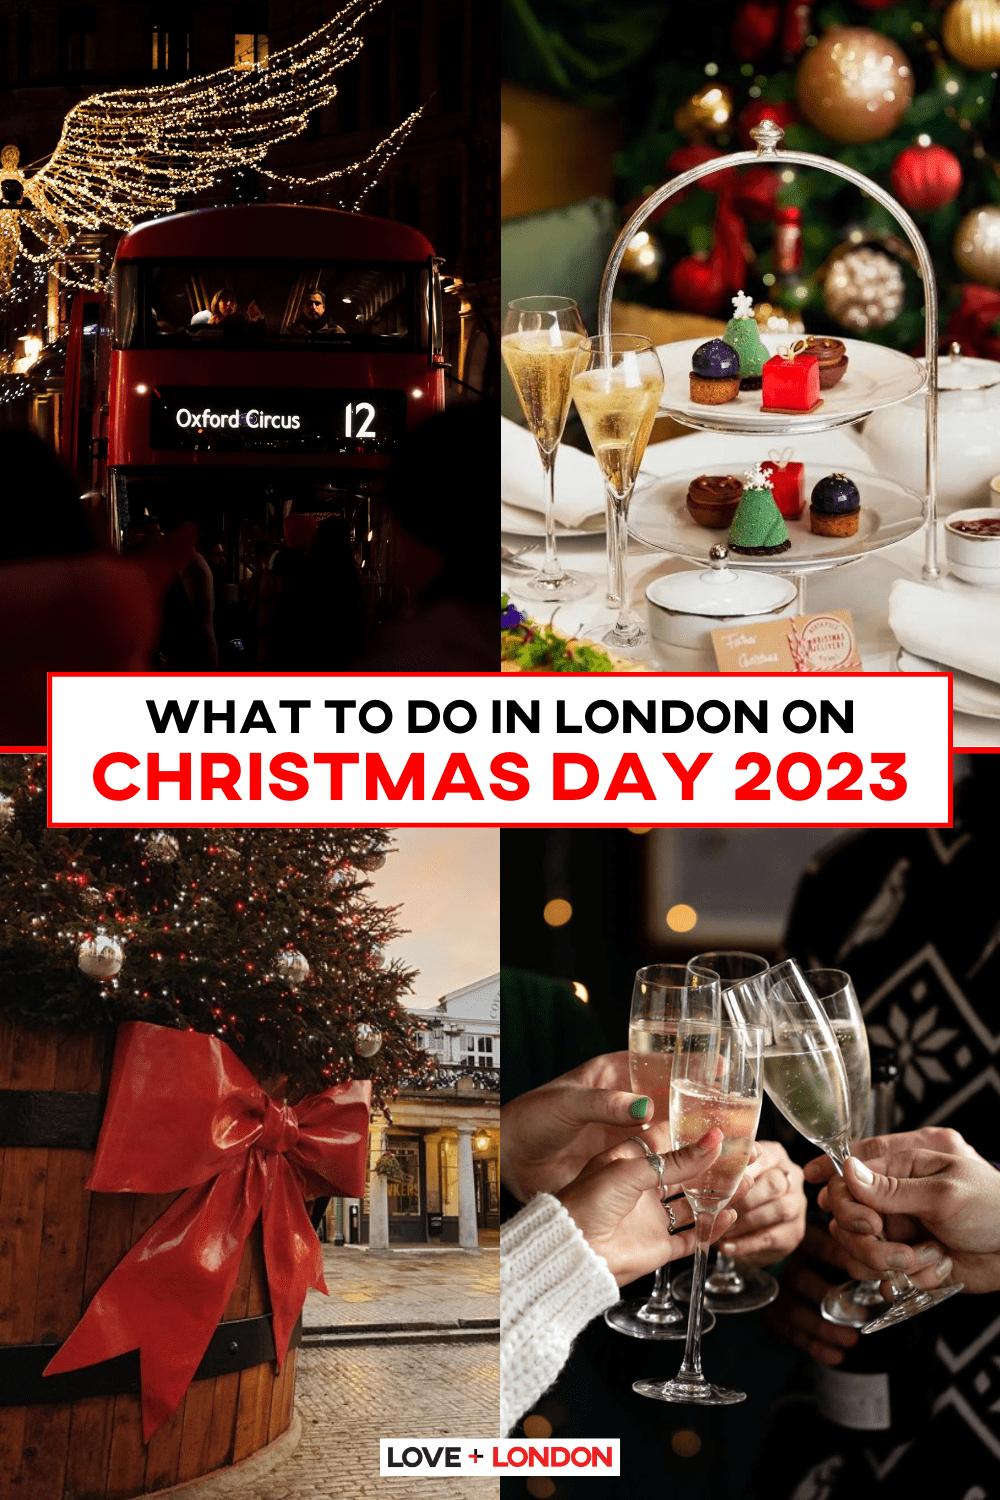 What to Do in London on Chirstmas Day 2023